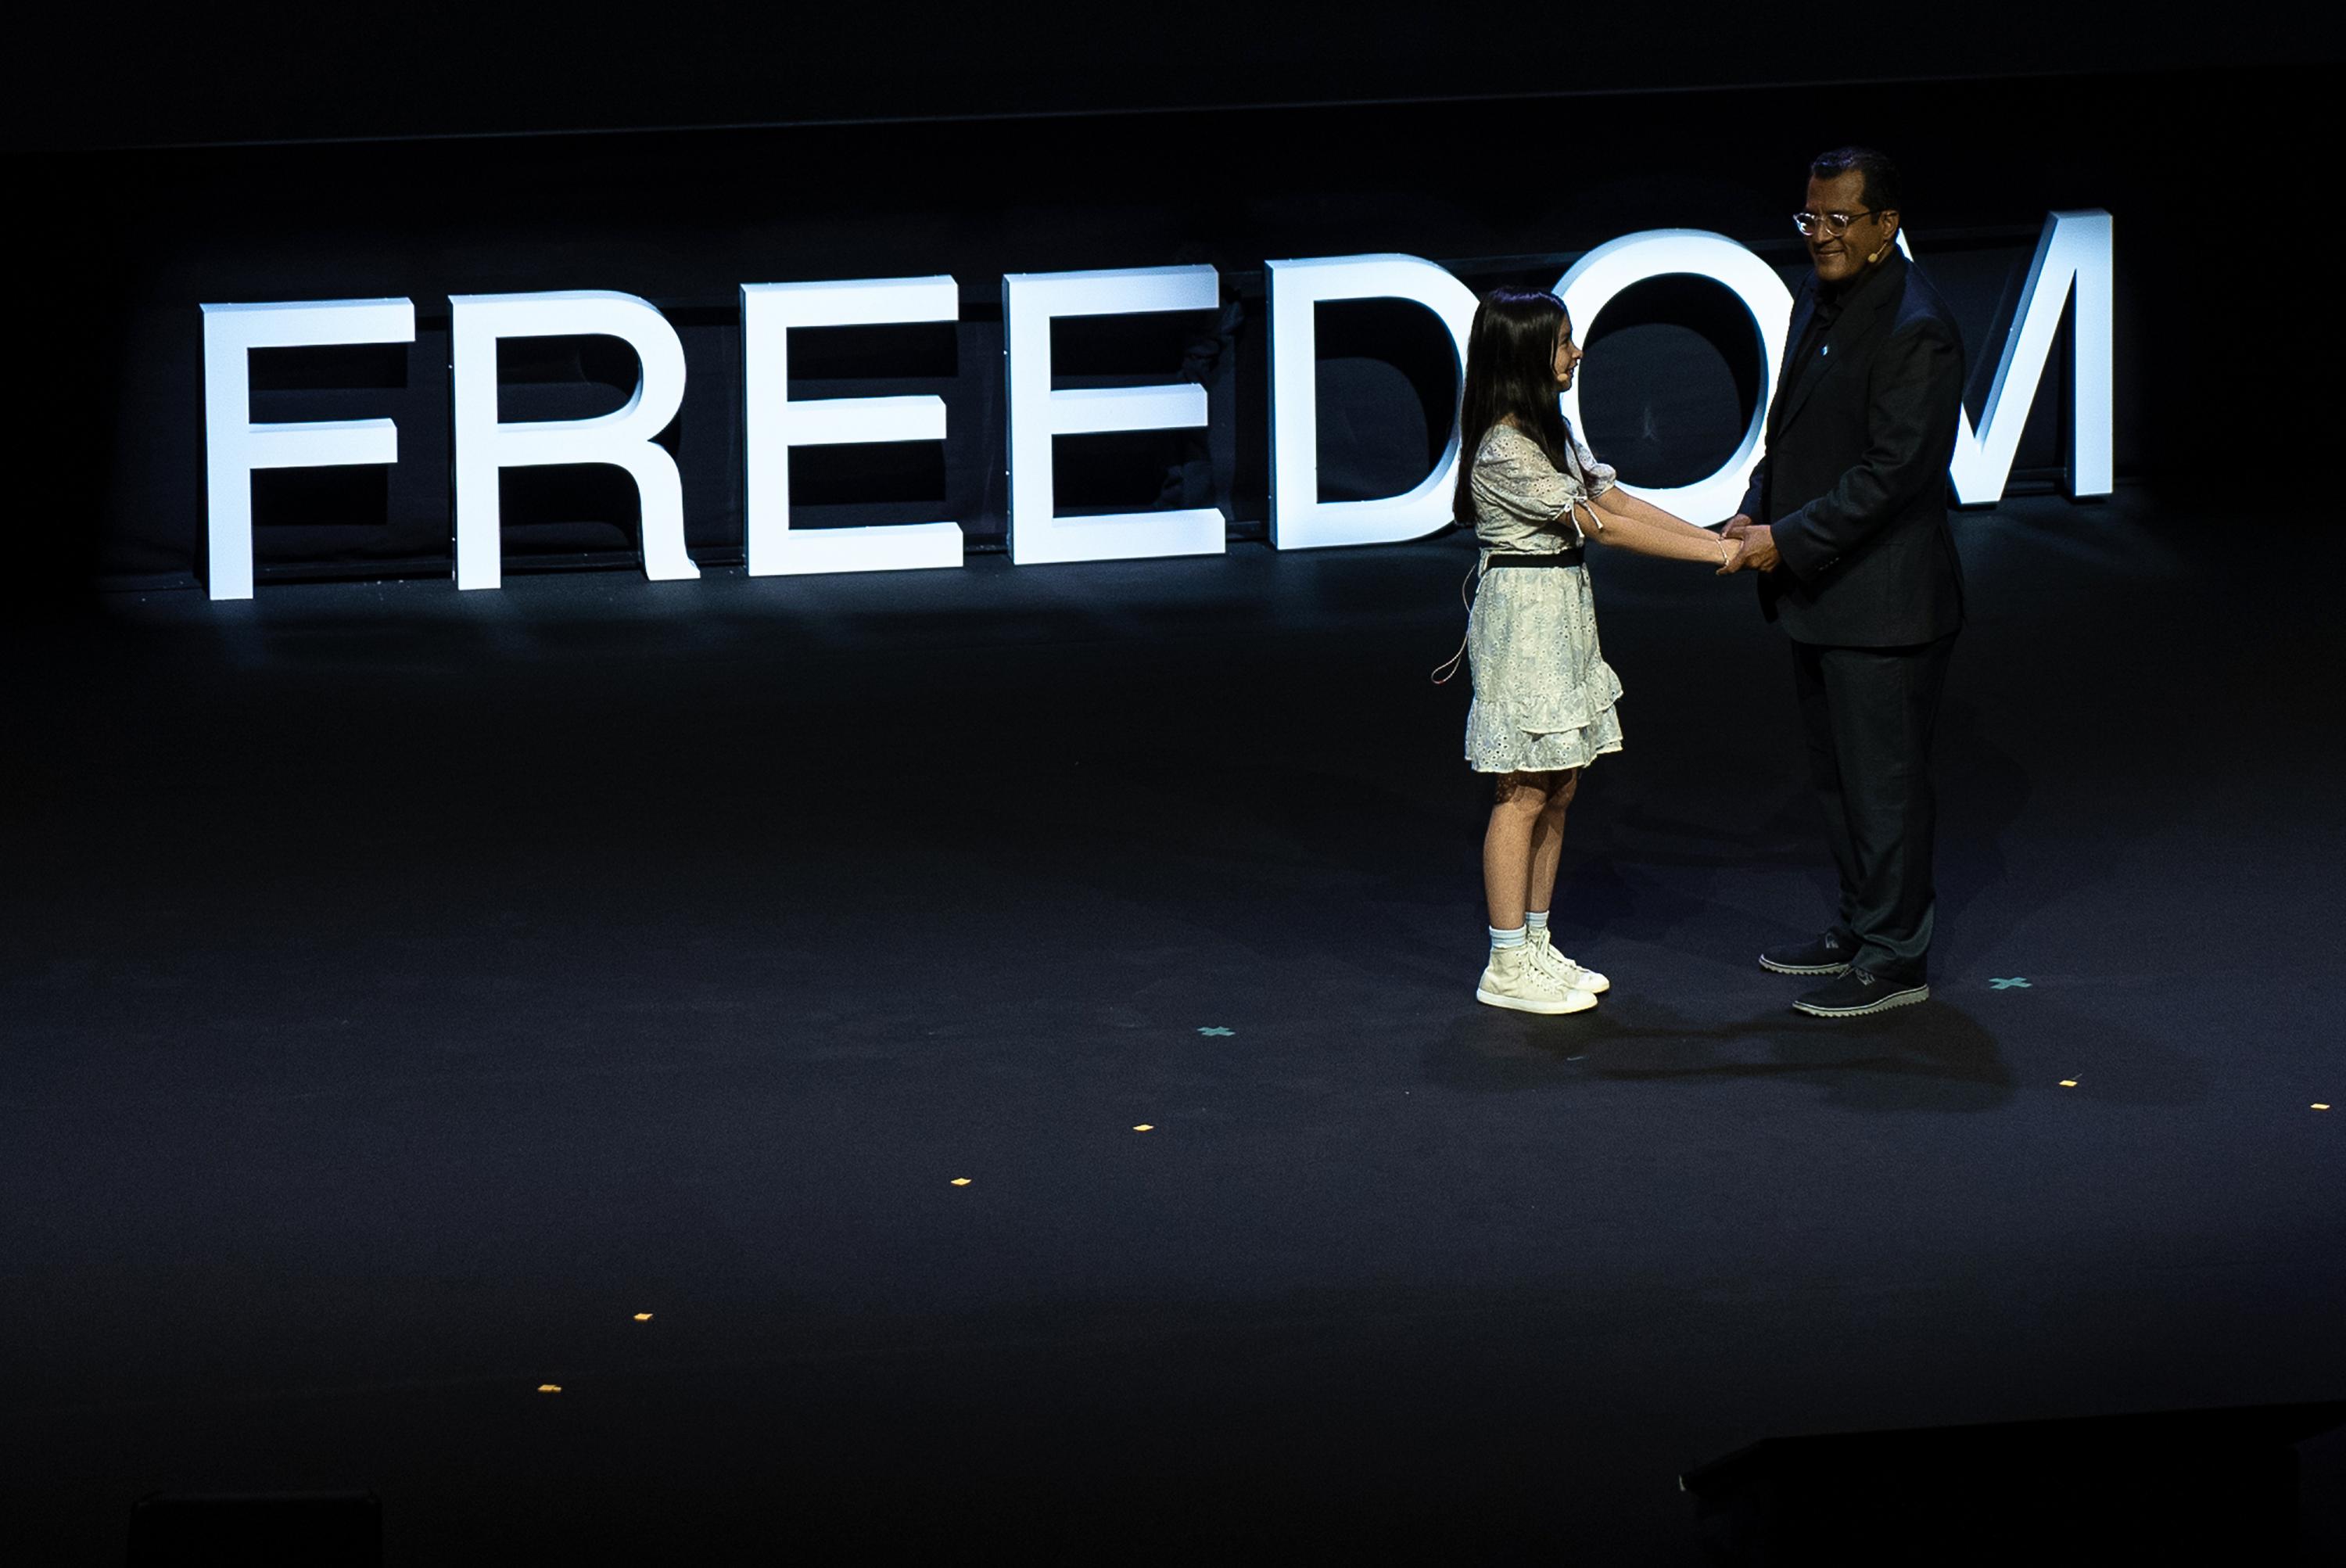 To close out his speech, Félix Maradiaga brought on stage his daughter Alejandra. He thanked her for giving him hope during his imprisonment. Photo El Faro/Oslo Freedom Forum